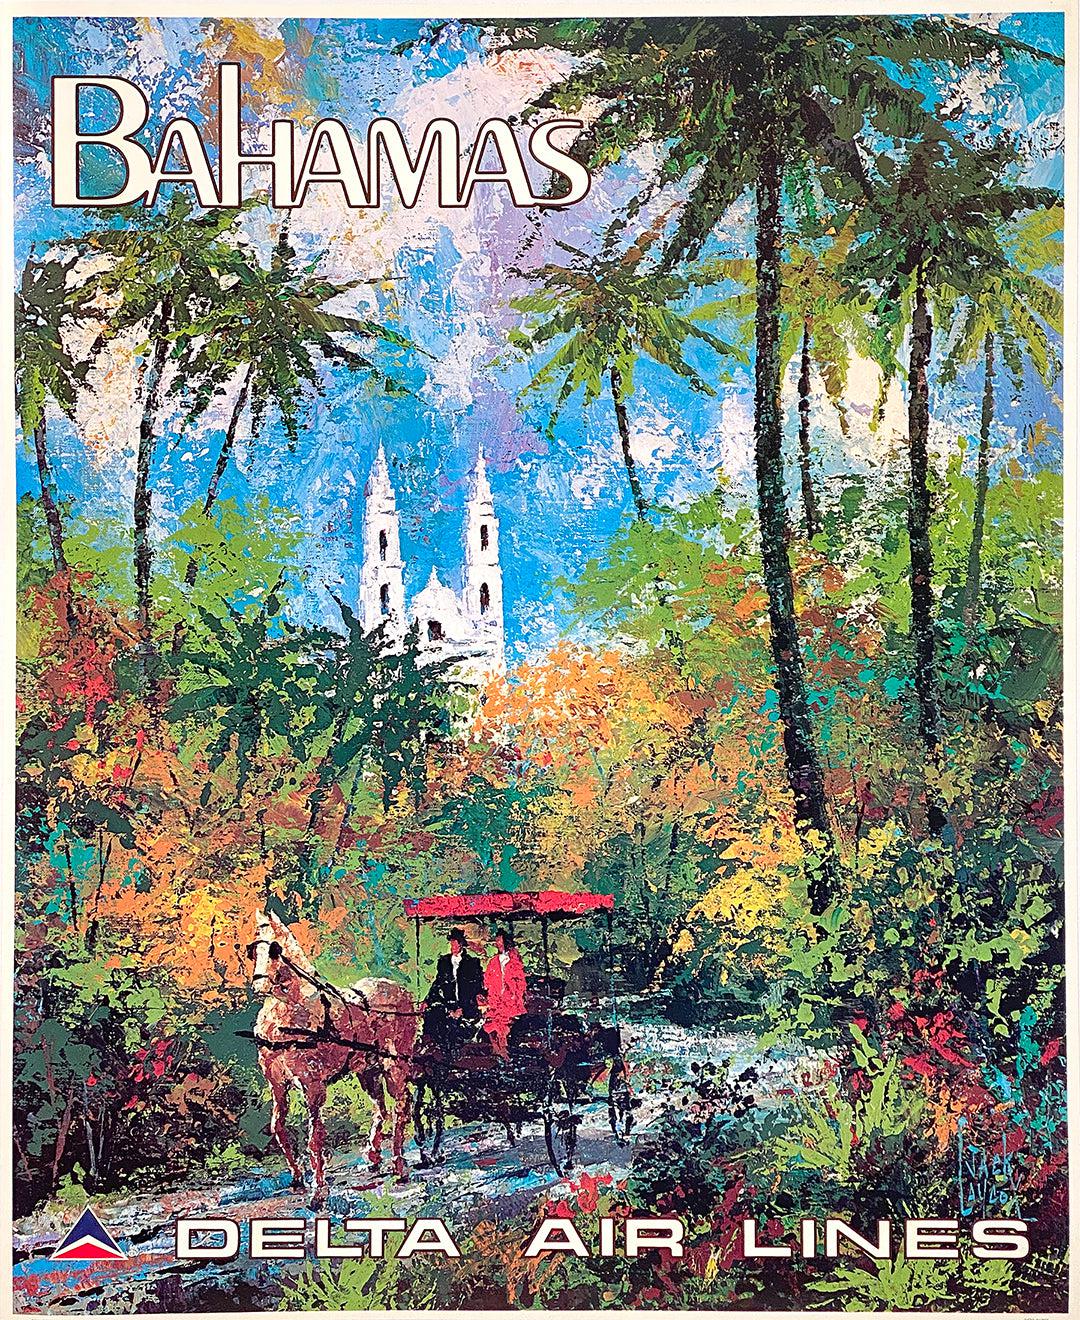 Original 1970's Delta Air Lines Poster for the Bahamas by Jack Laycox